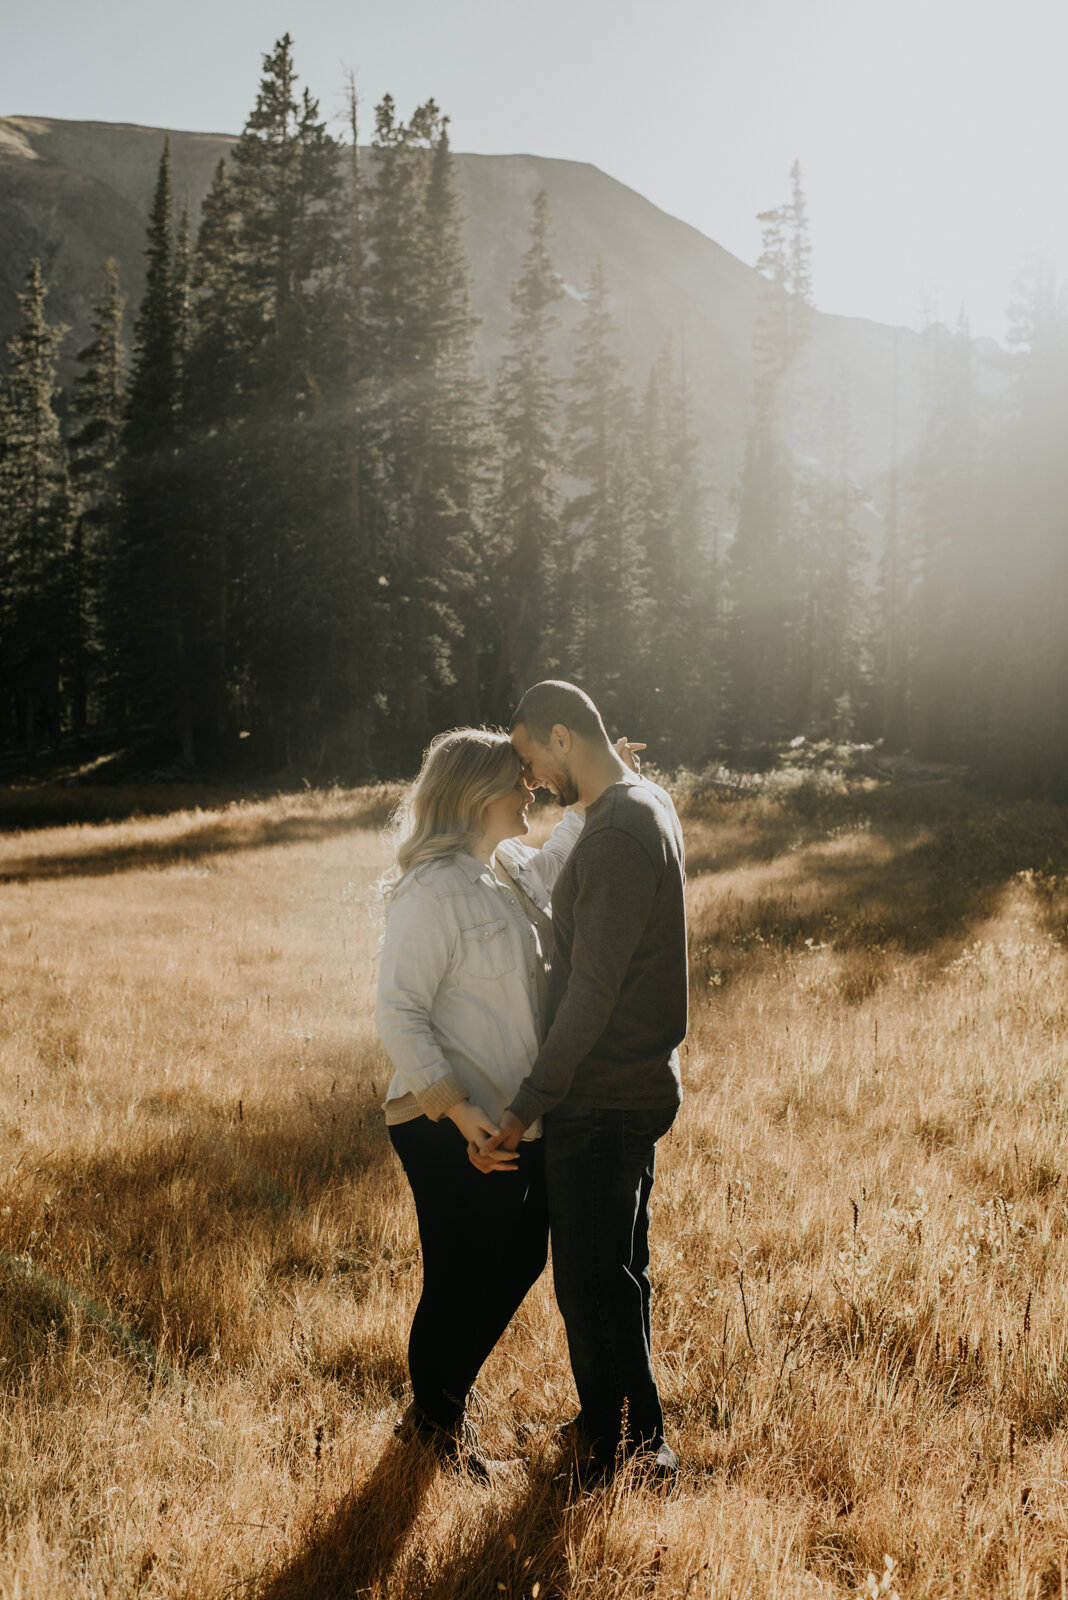 Indian Peaks Wilderness Area Engagement Photos